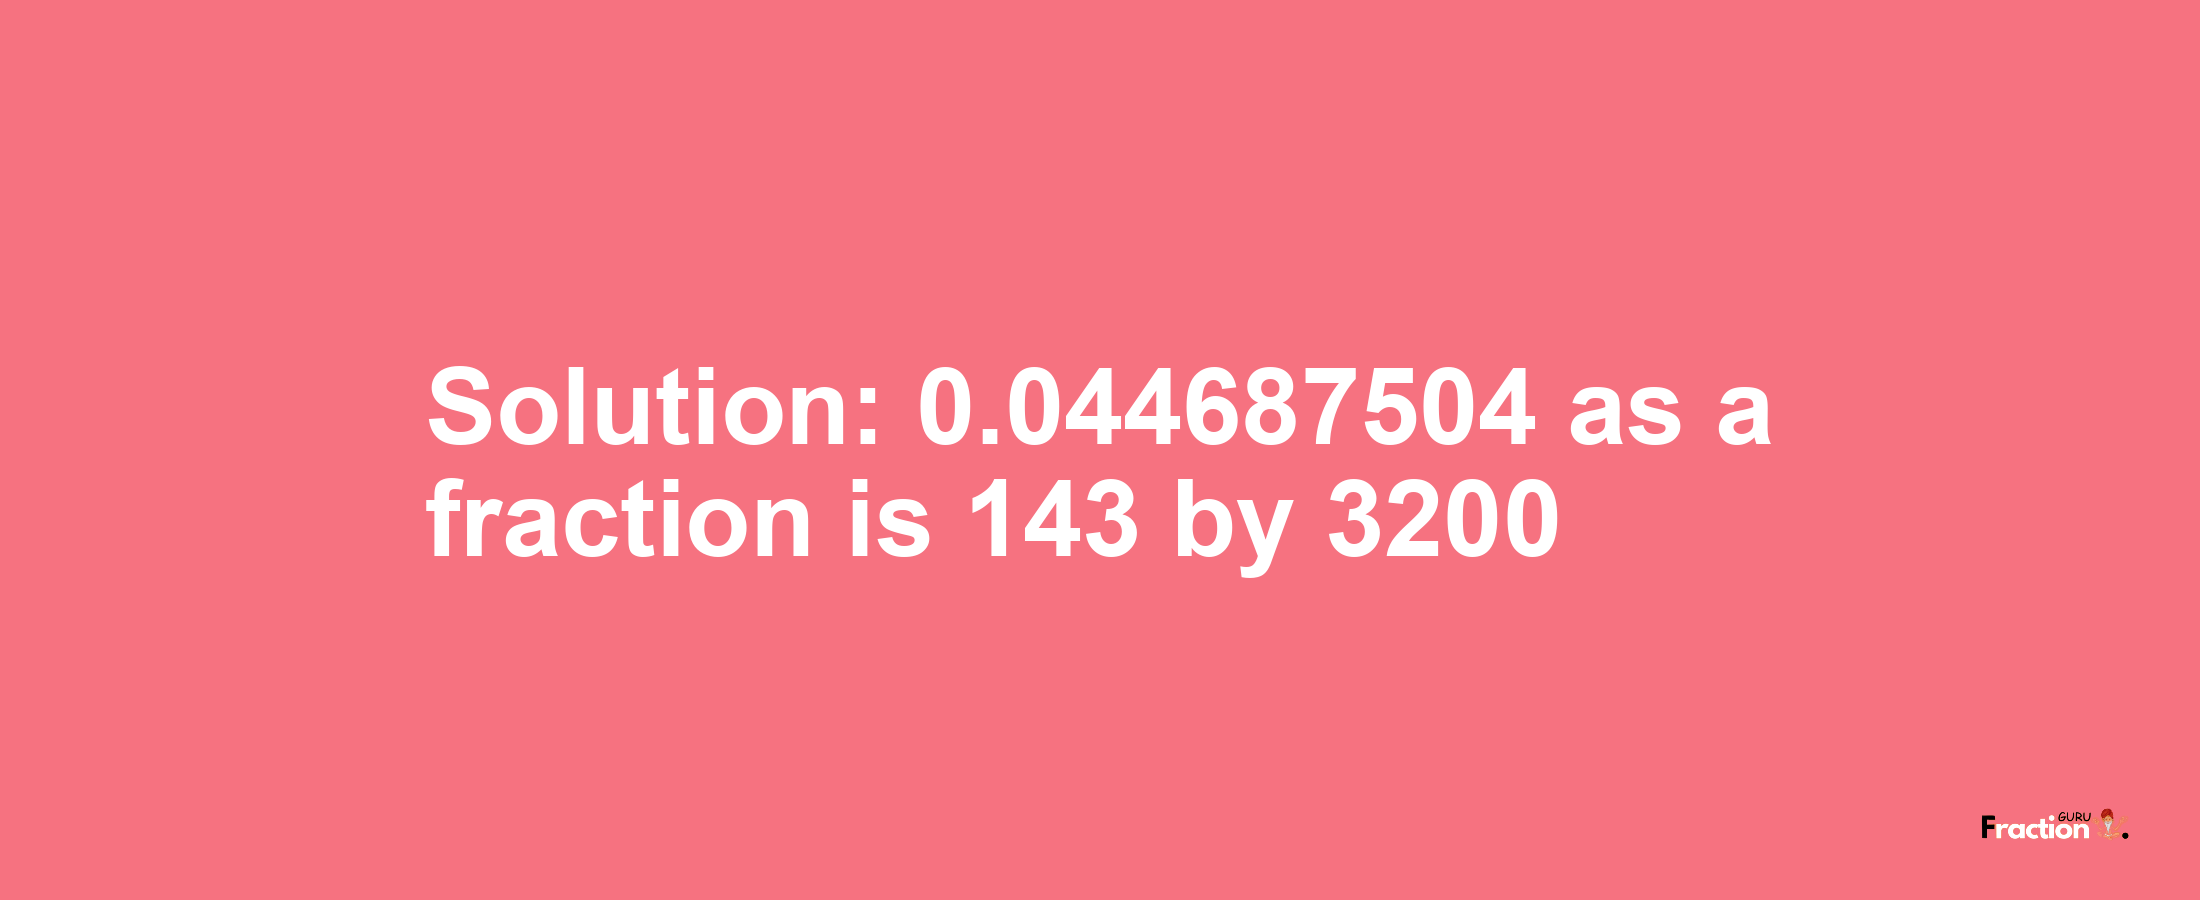 Solution:0.044687504 as a fraction is 143/3200